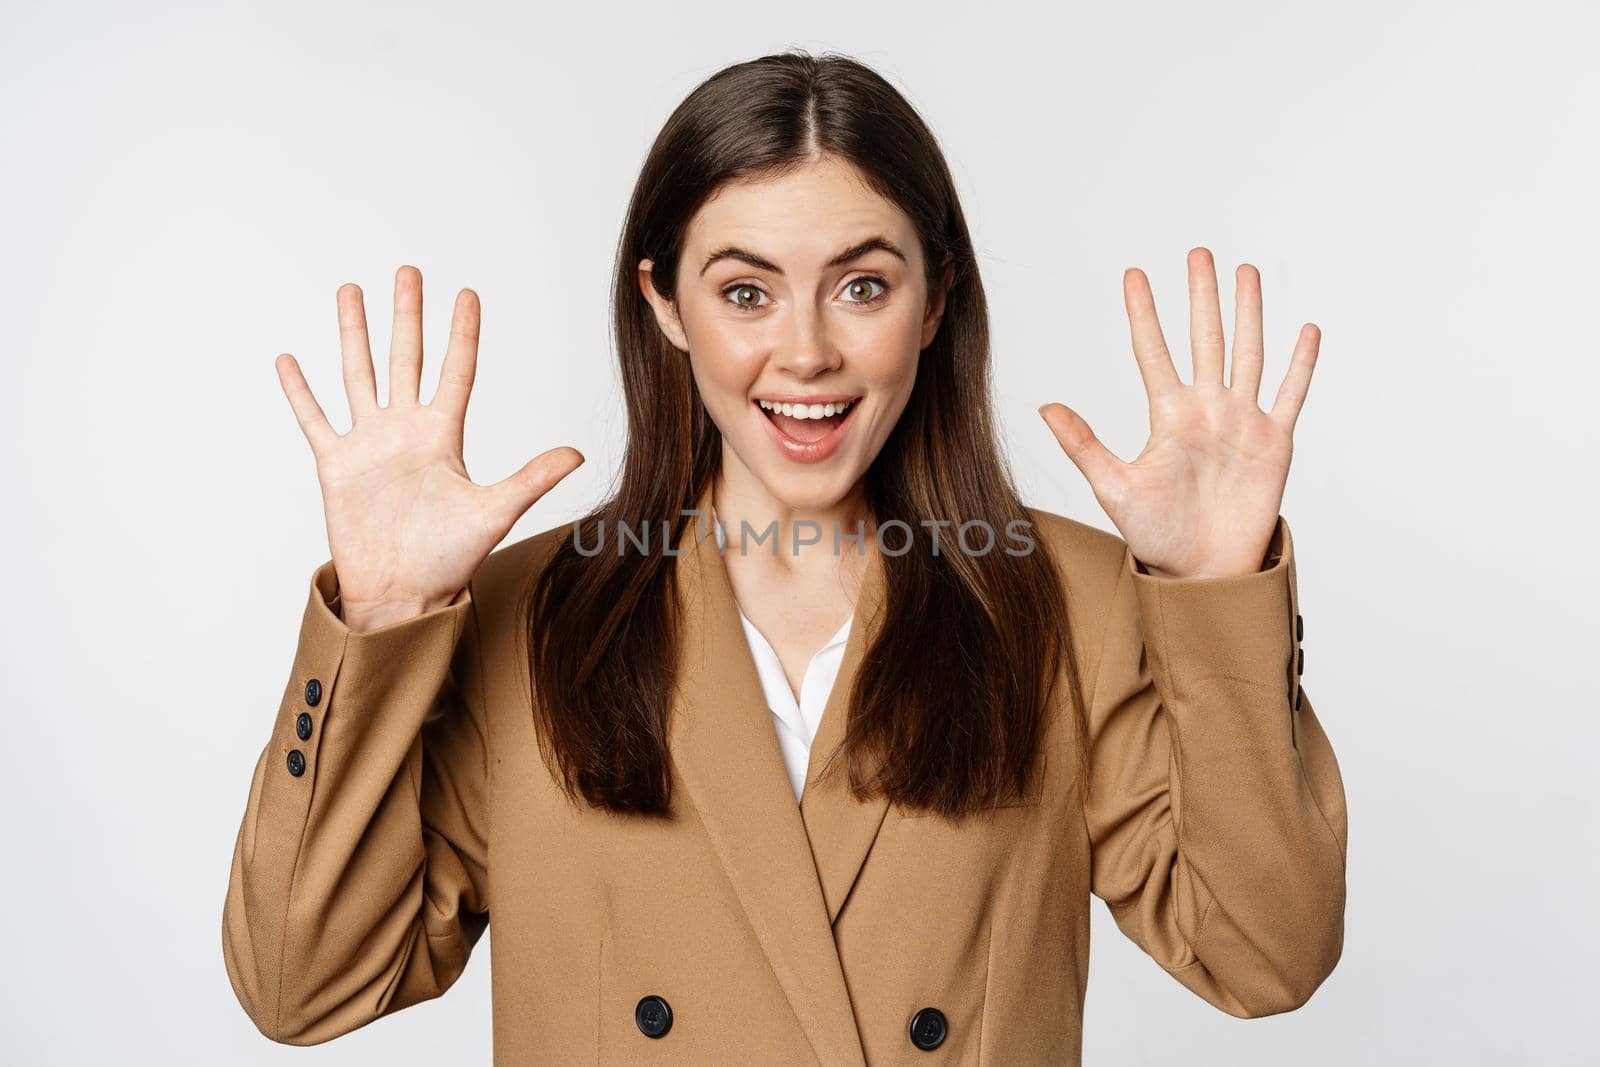 Enthusiastic businesswoman in suit, raising hands palms up, number ten dozen gesture and smiling, standing over white background.